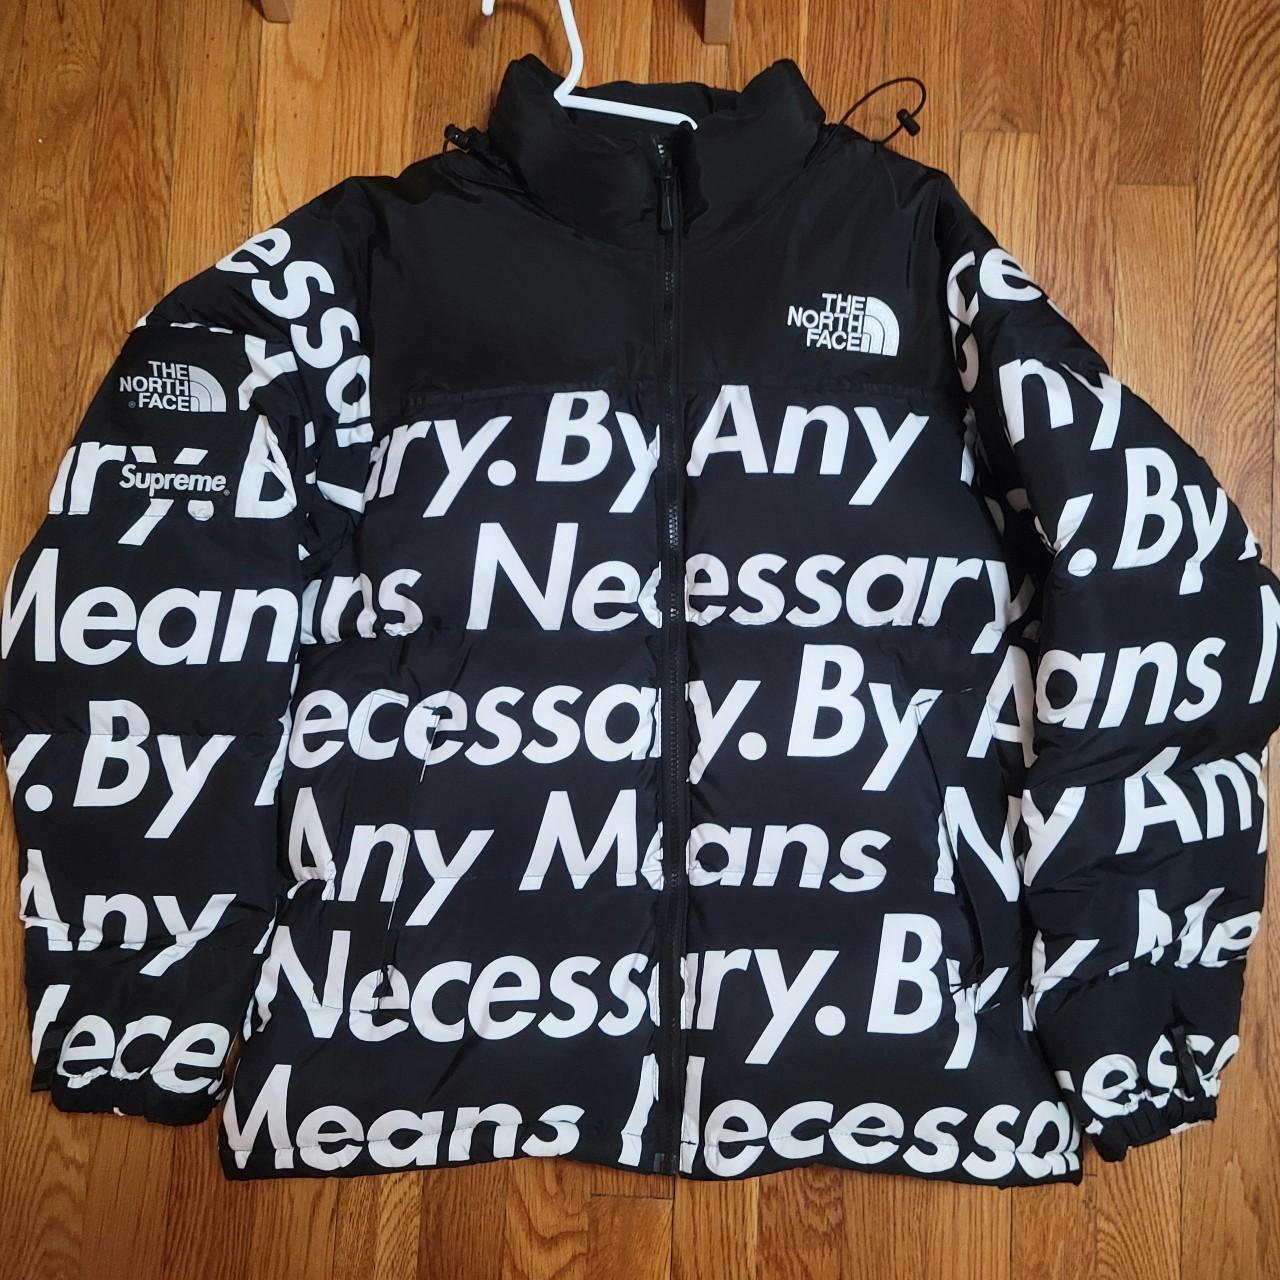 Supreme Supreme x The North Face by any means necessary